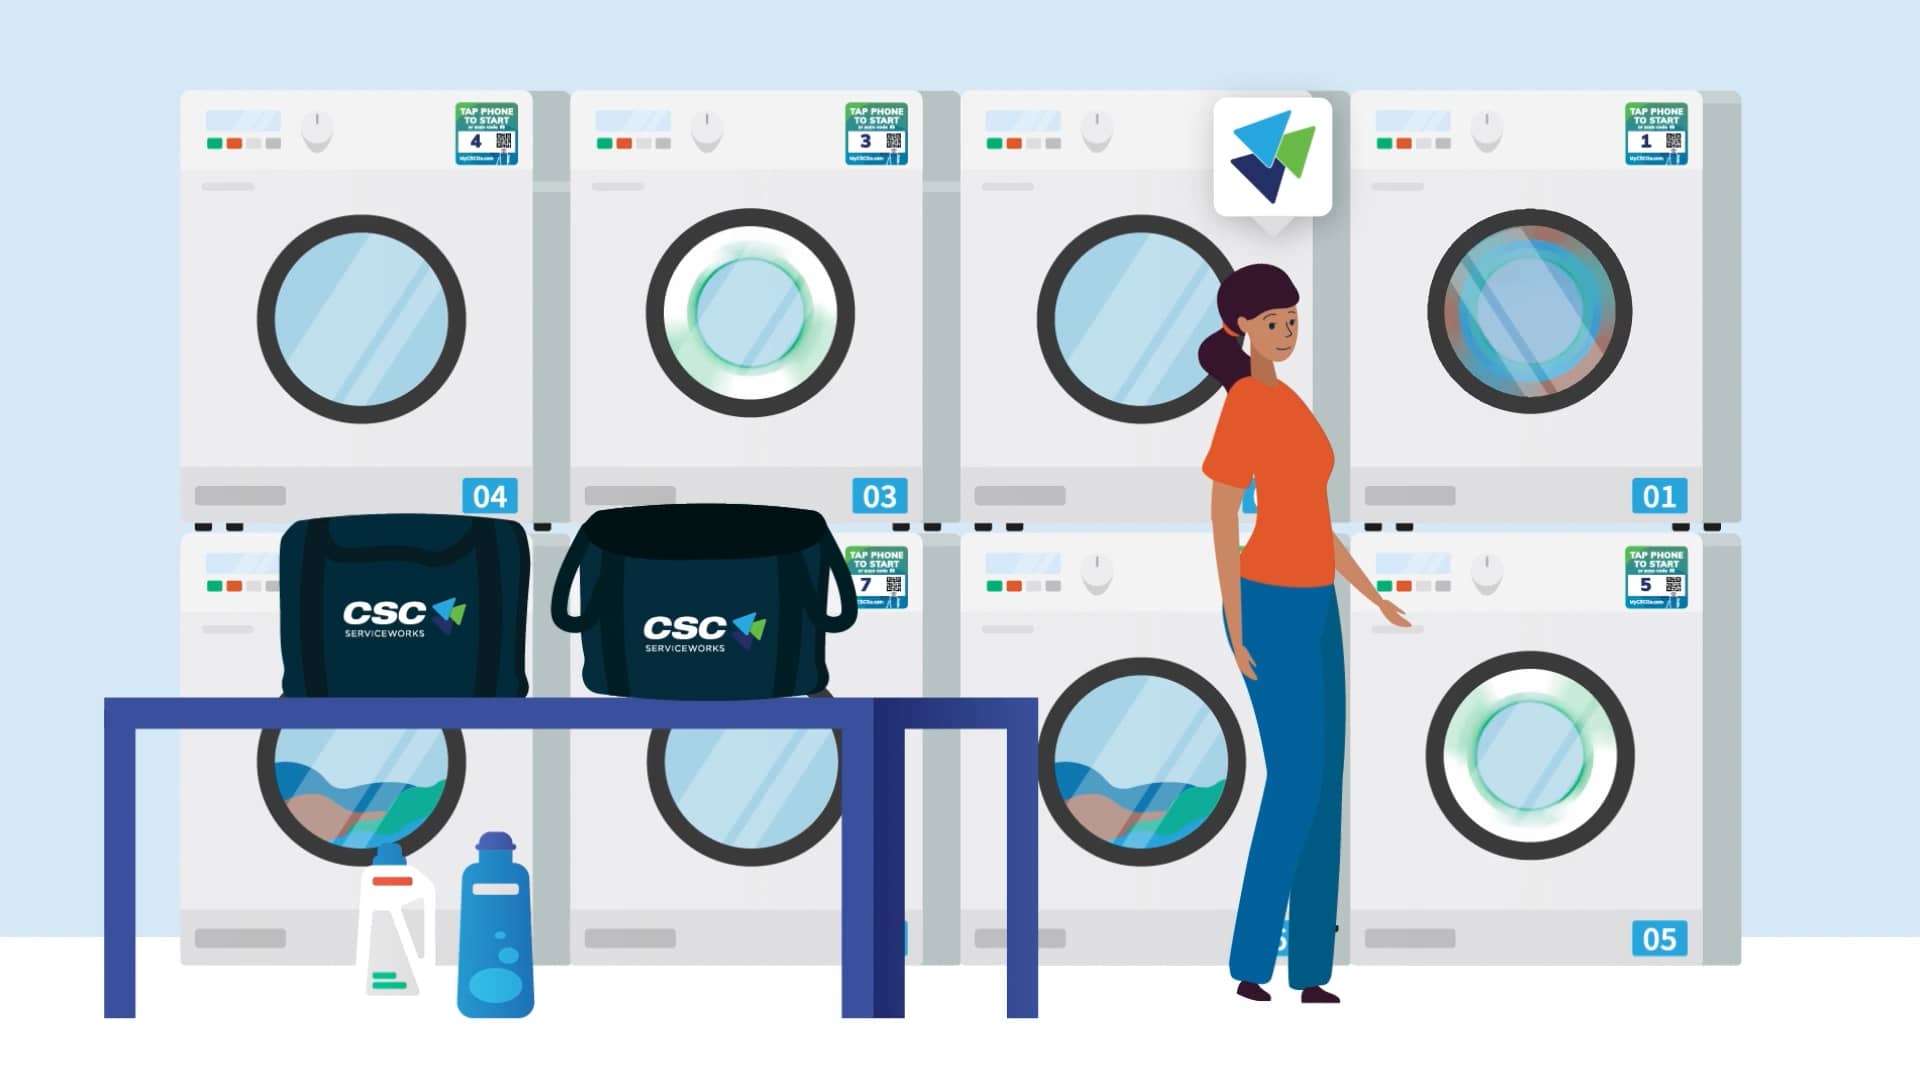 Introducing Wash Dry Fold from CSC ServiceWorks on Vimeo